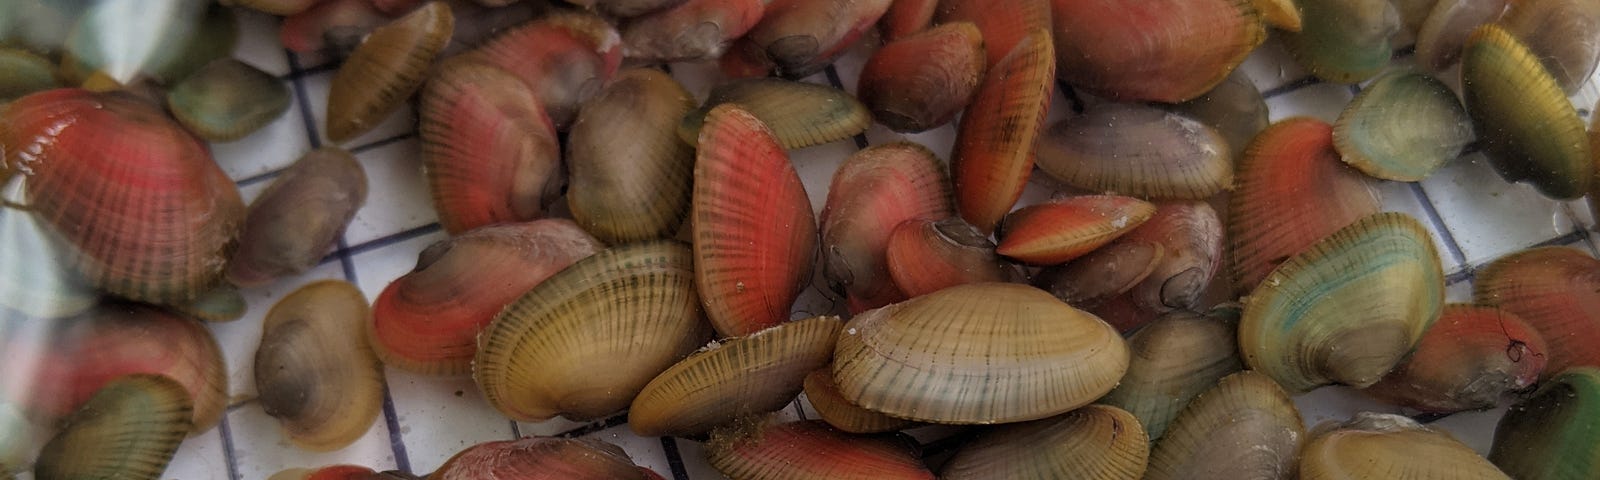 a container holding red, blue, purple and naturally colored mussels.